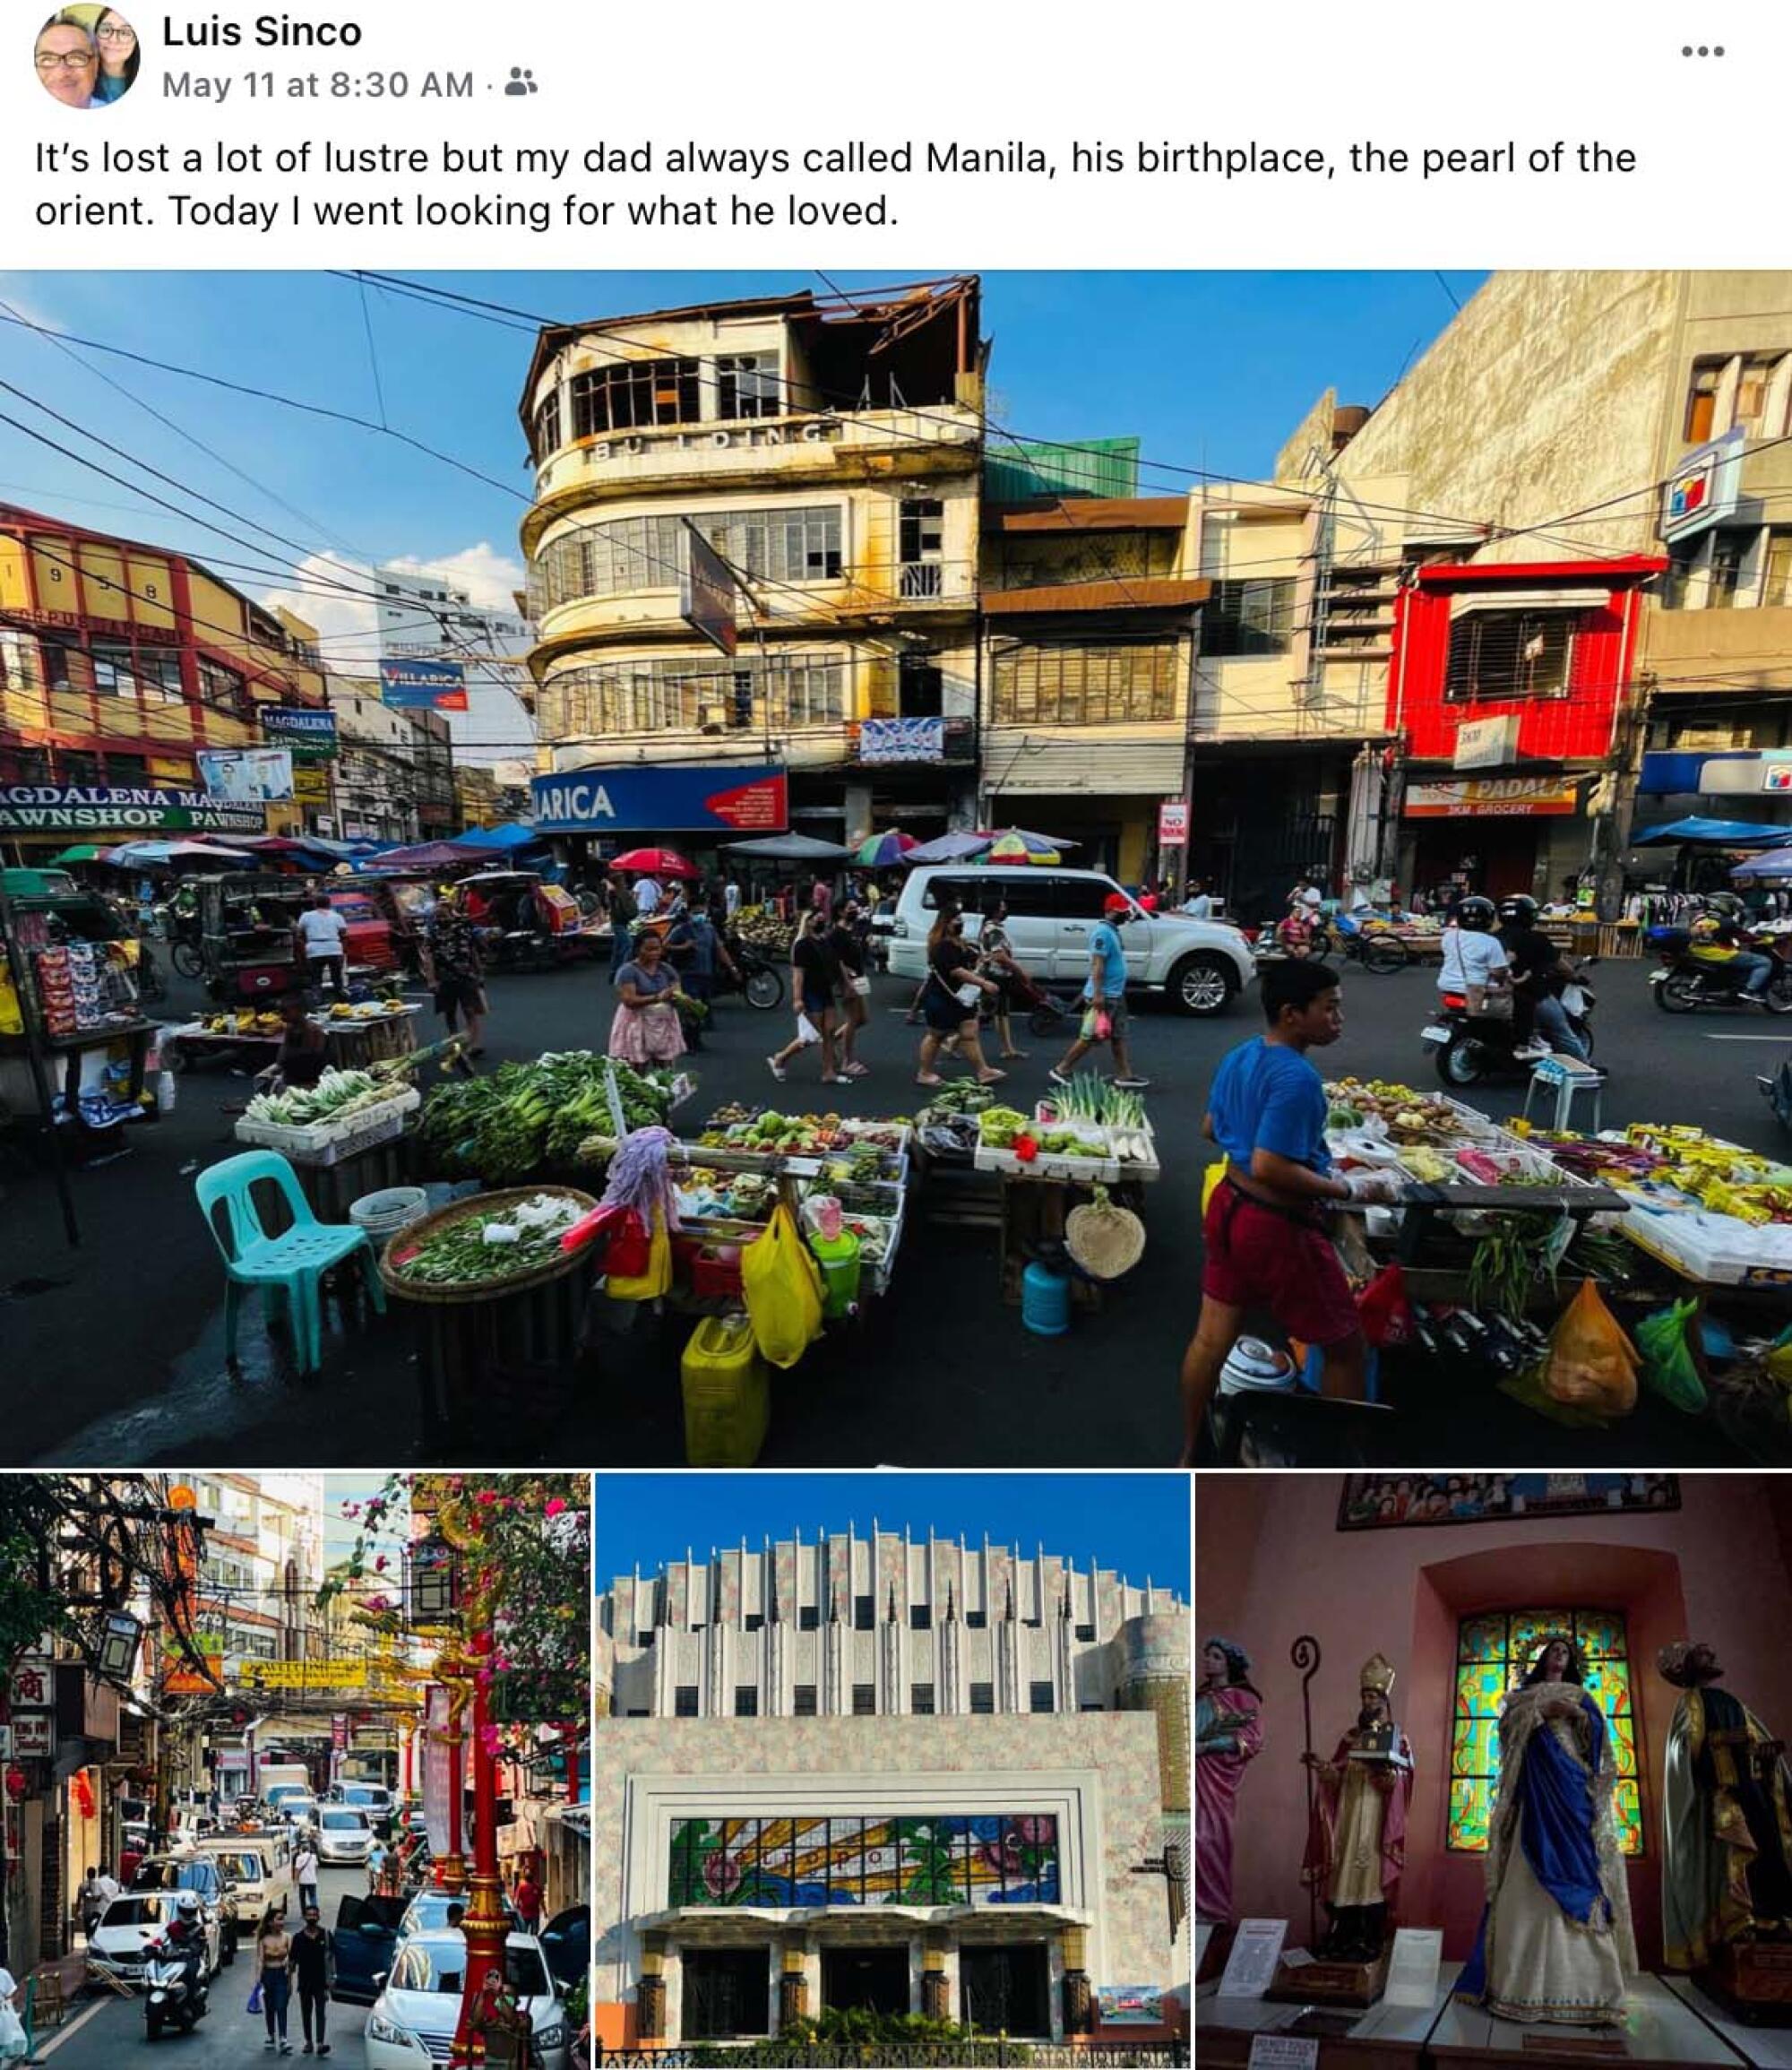 Street scenes from the Philippines